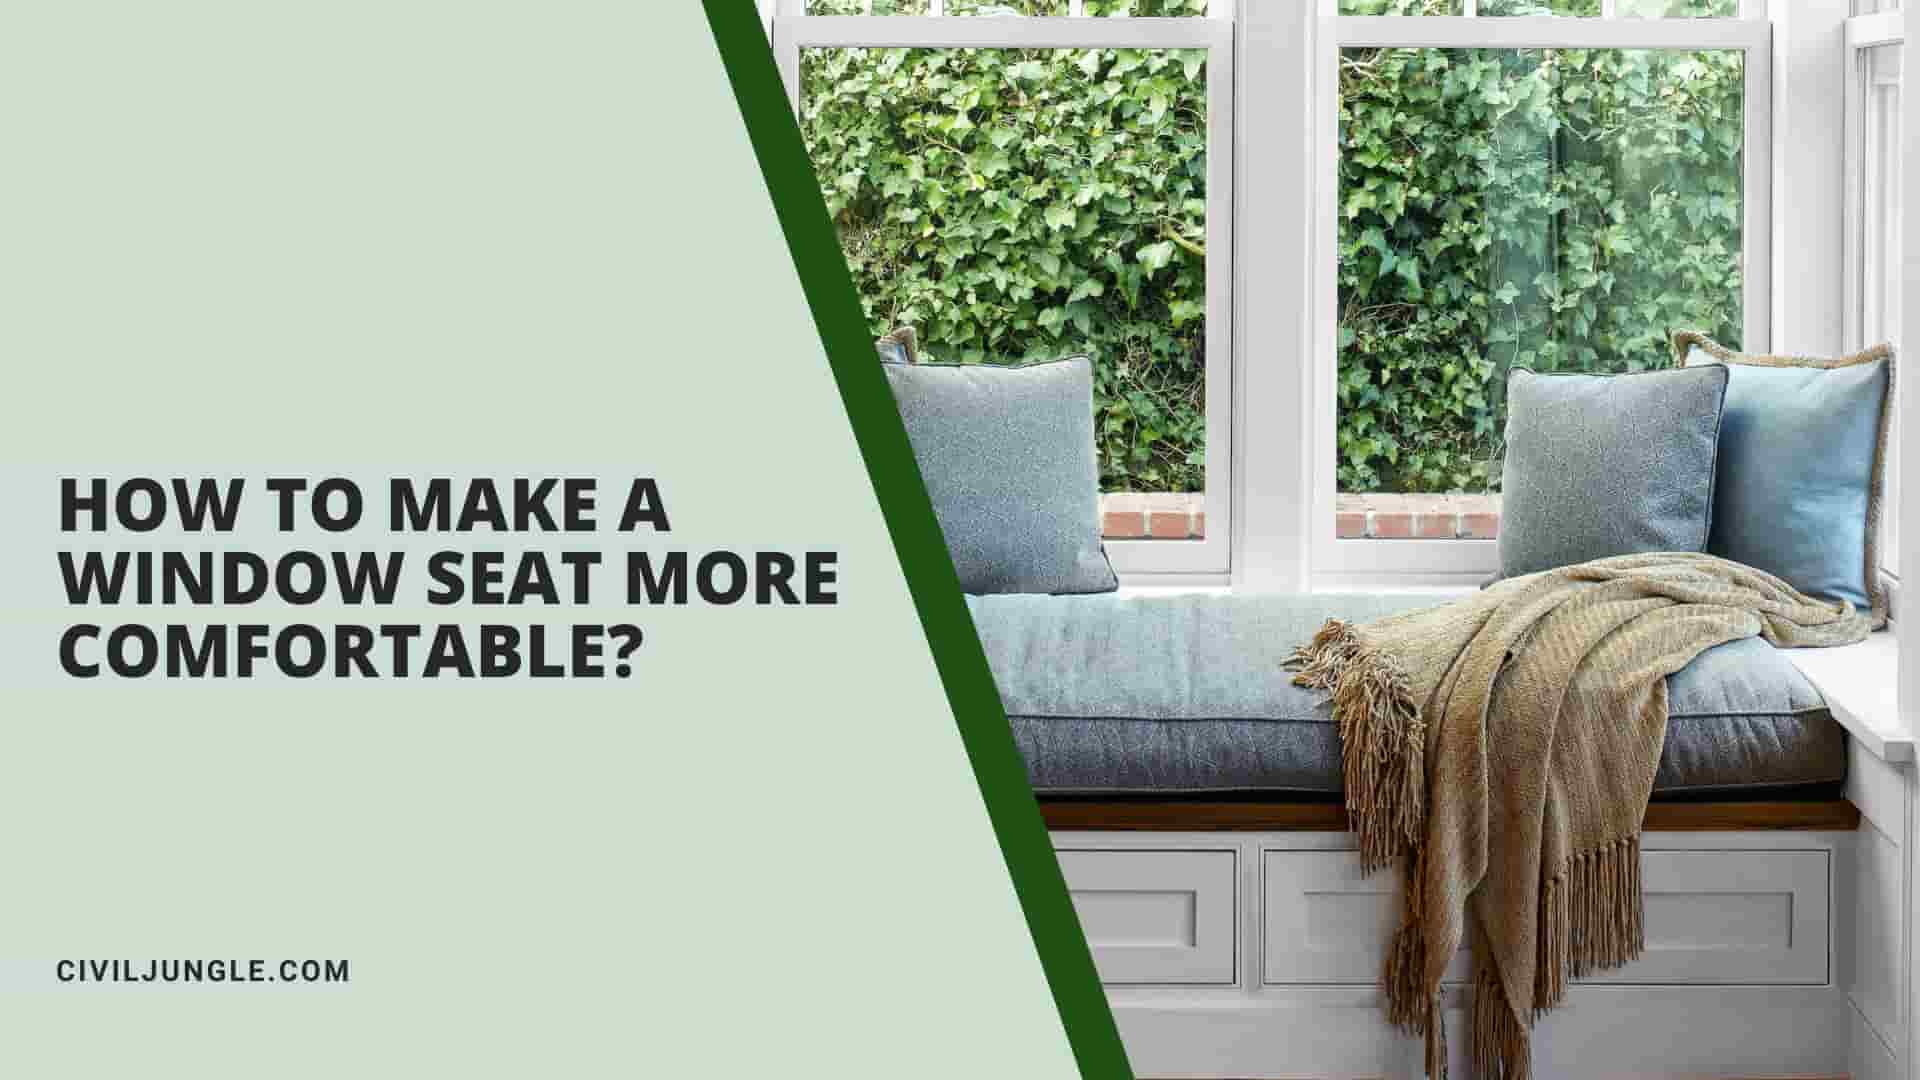 How To Make A Window Seat More Comfortable?